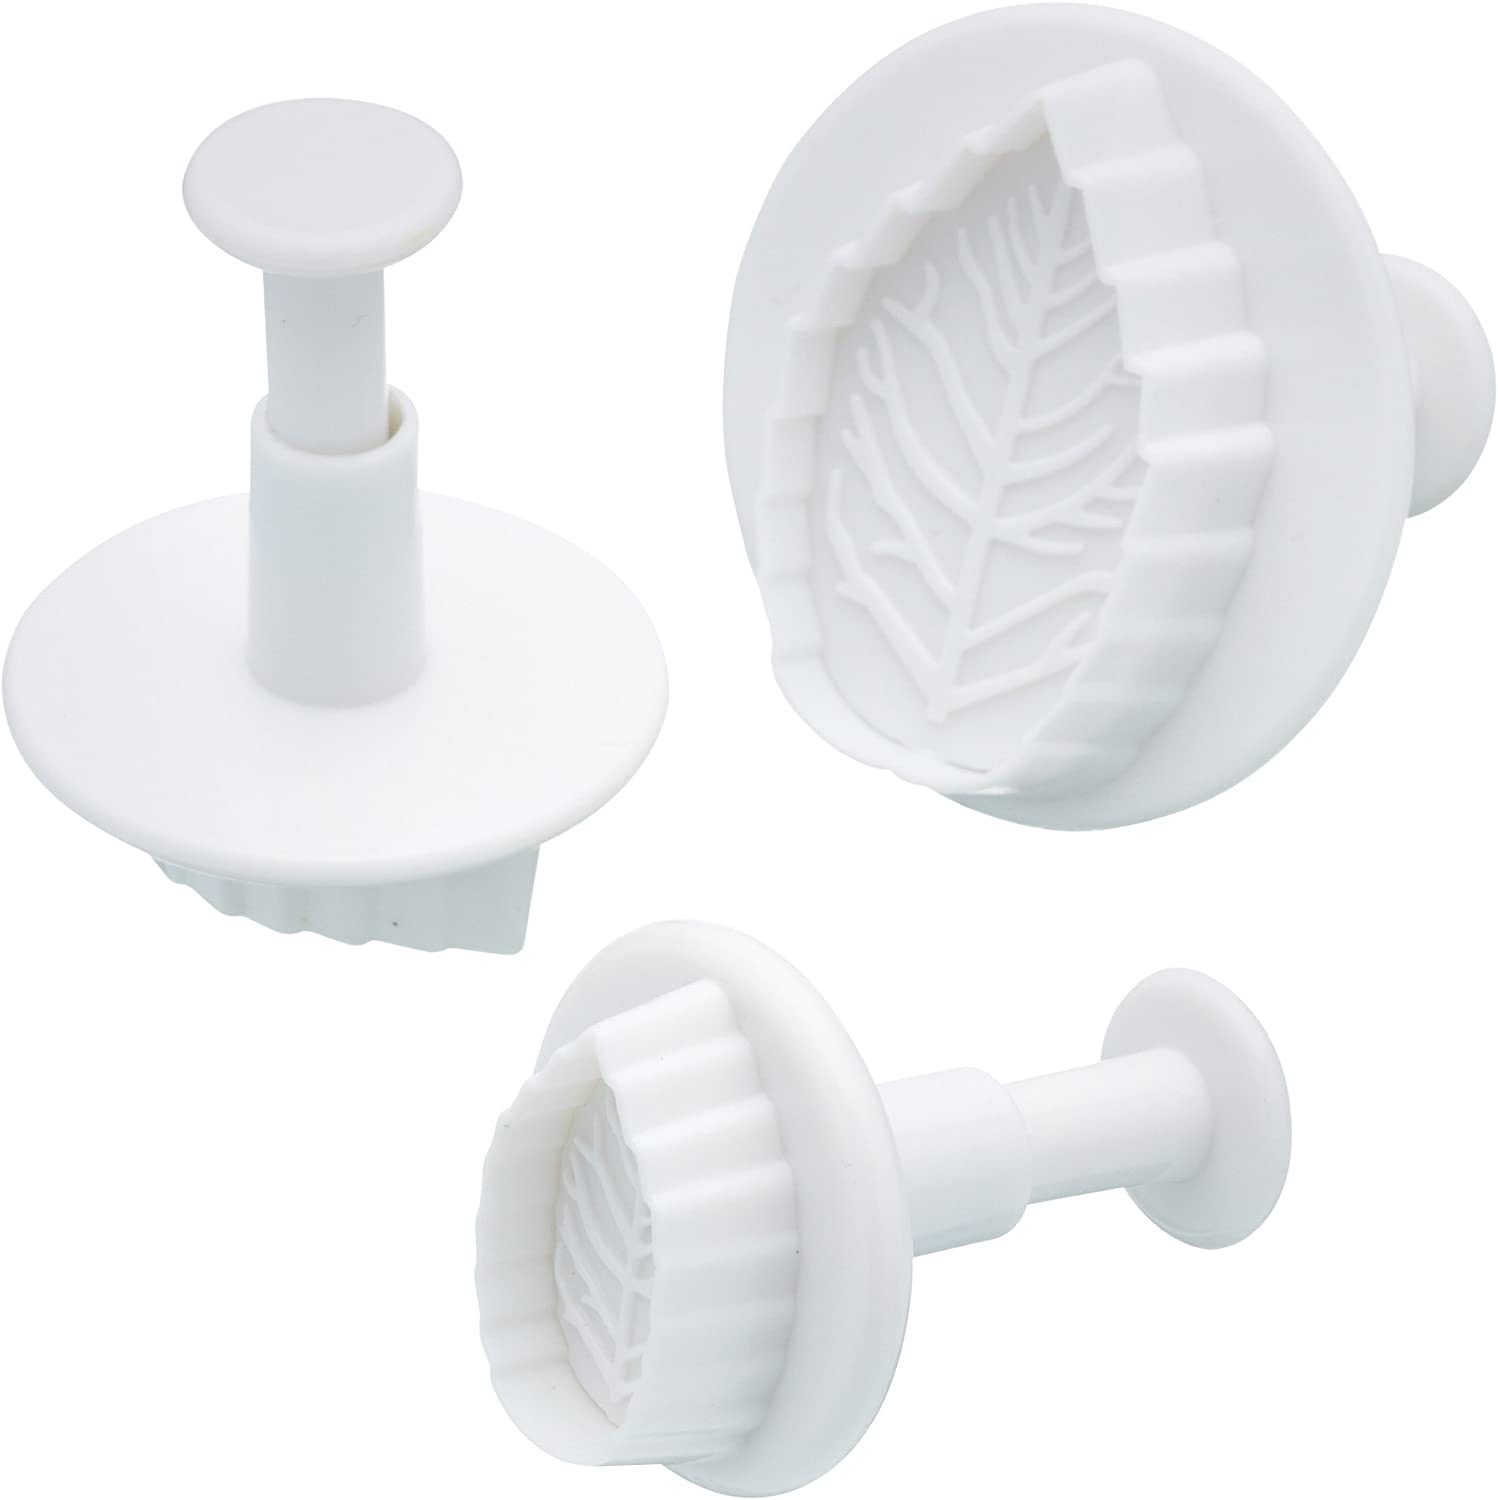 KitchenCraft Sweetly Does It Leaf Fondant Plunger Cutters, Set of 3